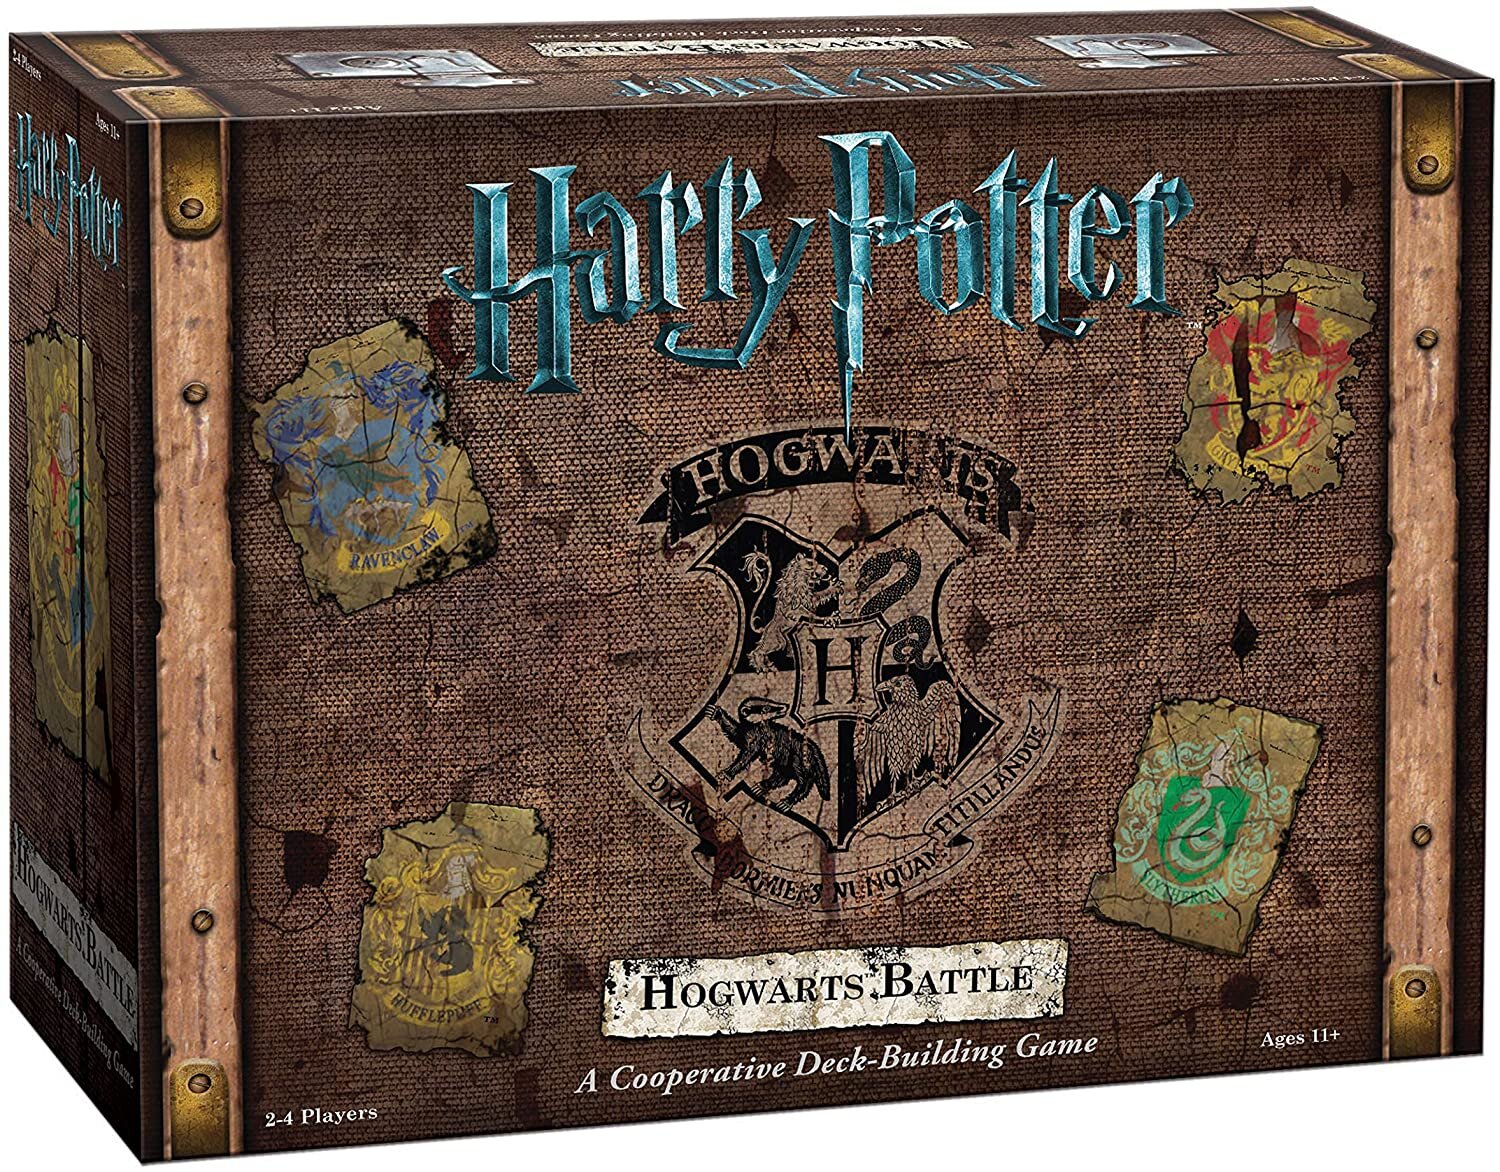 Great Harry Potter Gifts for Kids for 2022